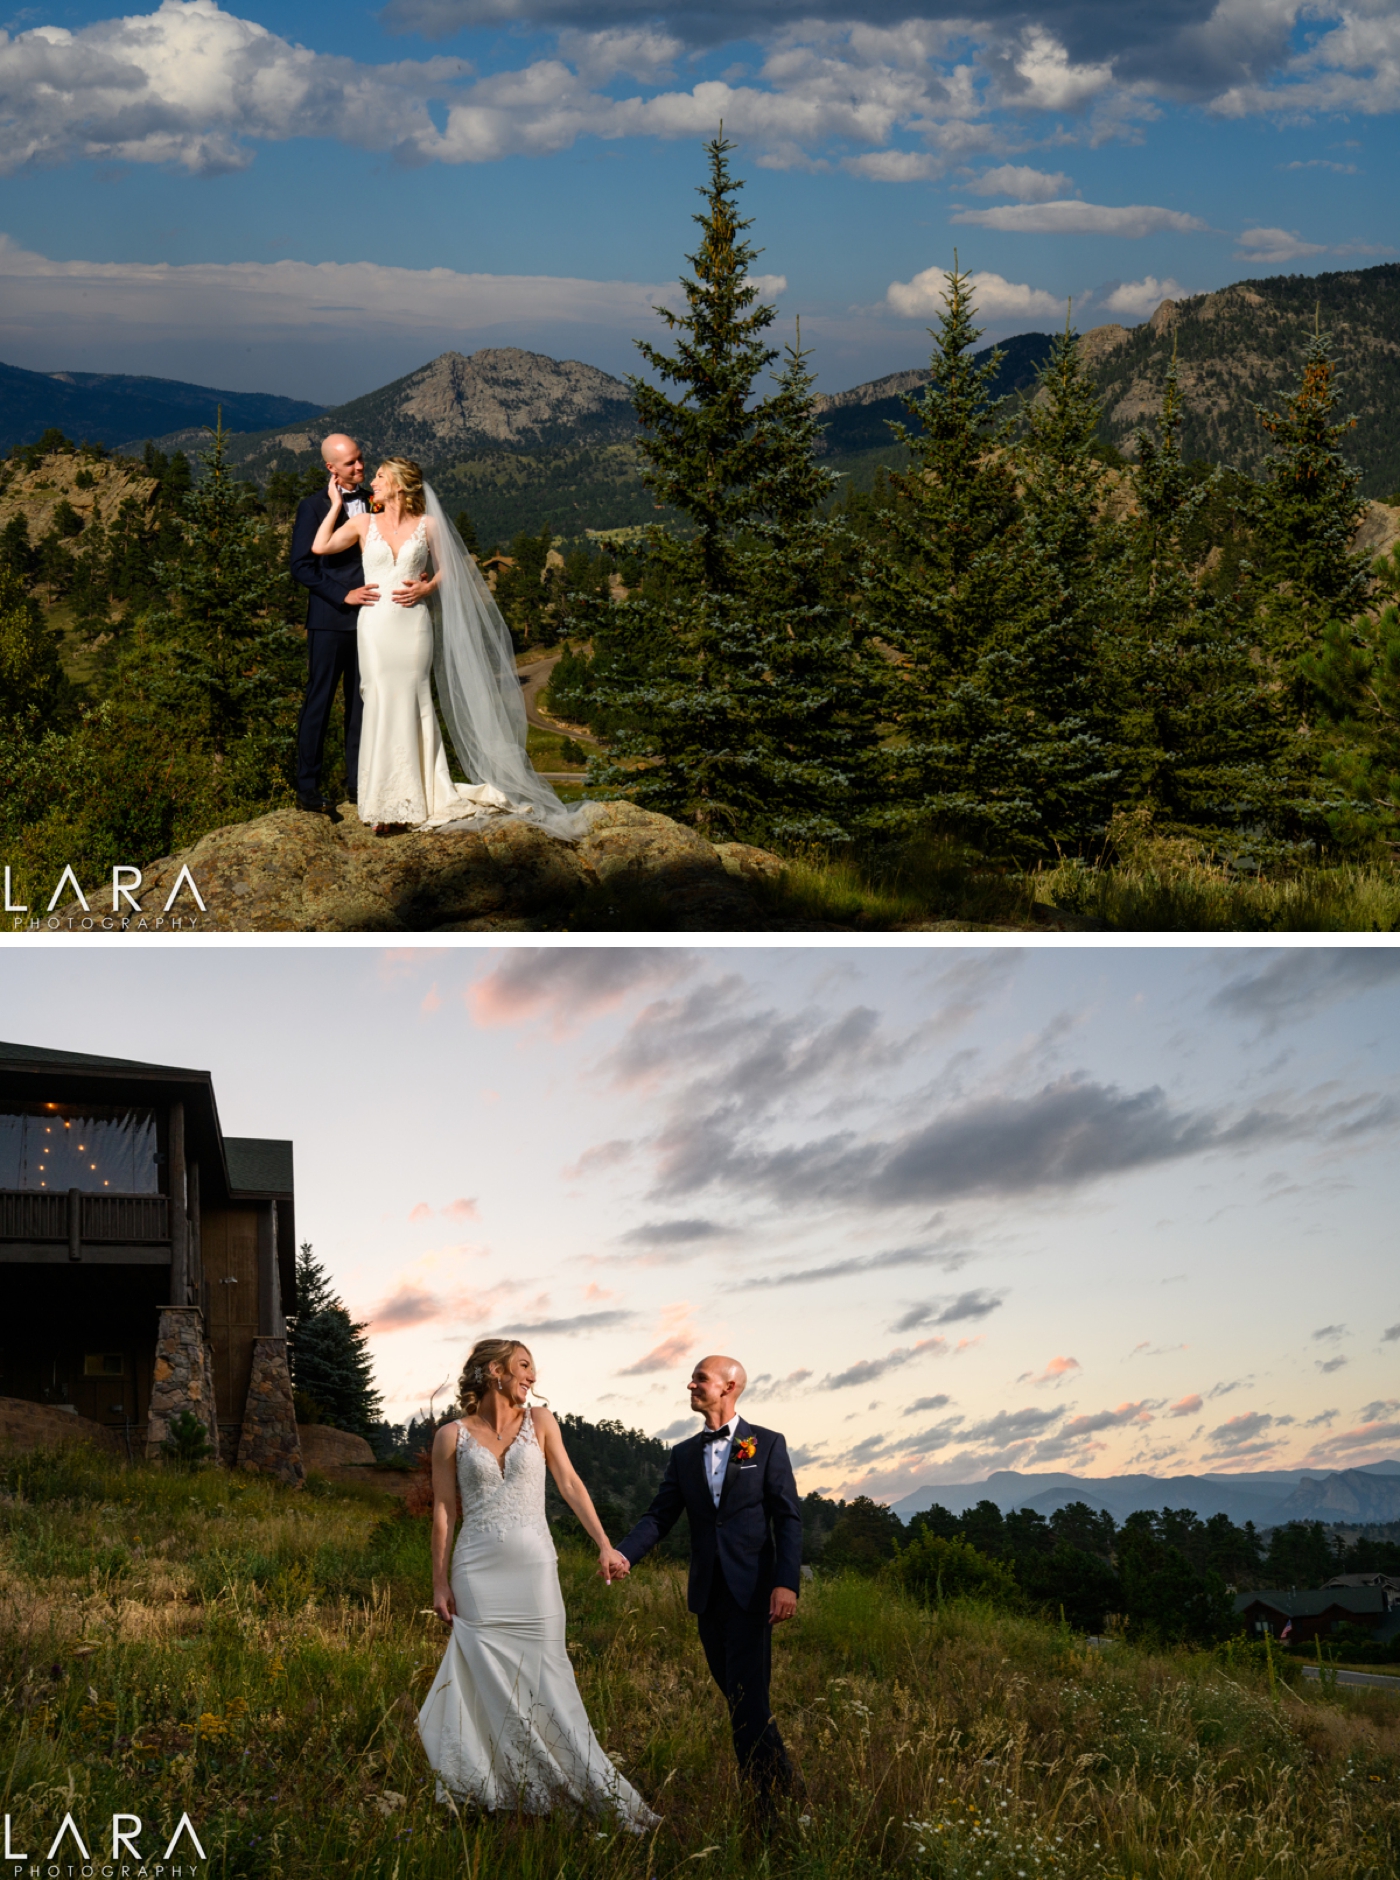 All-inclusive weddings in Estes Park at Taharaa Mountain Lodge